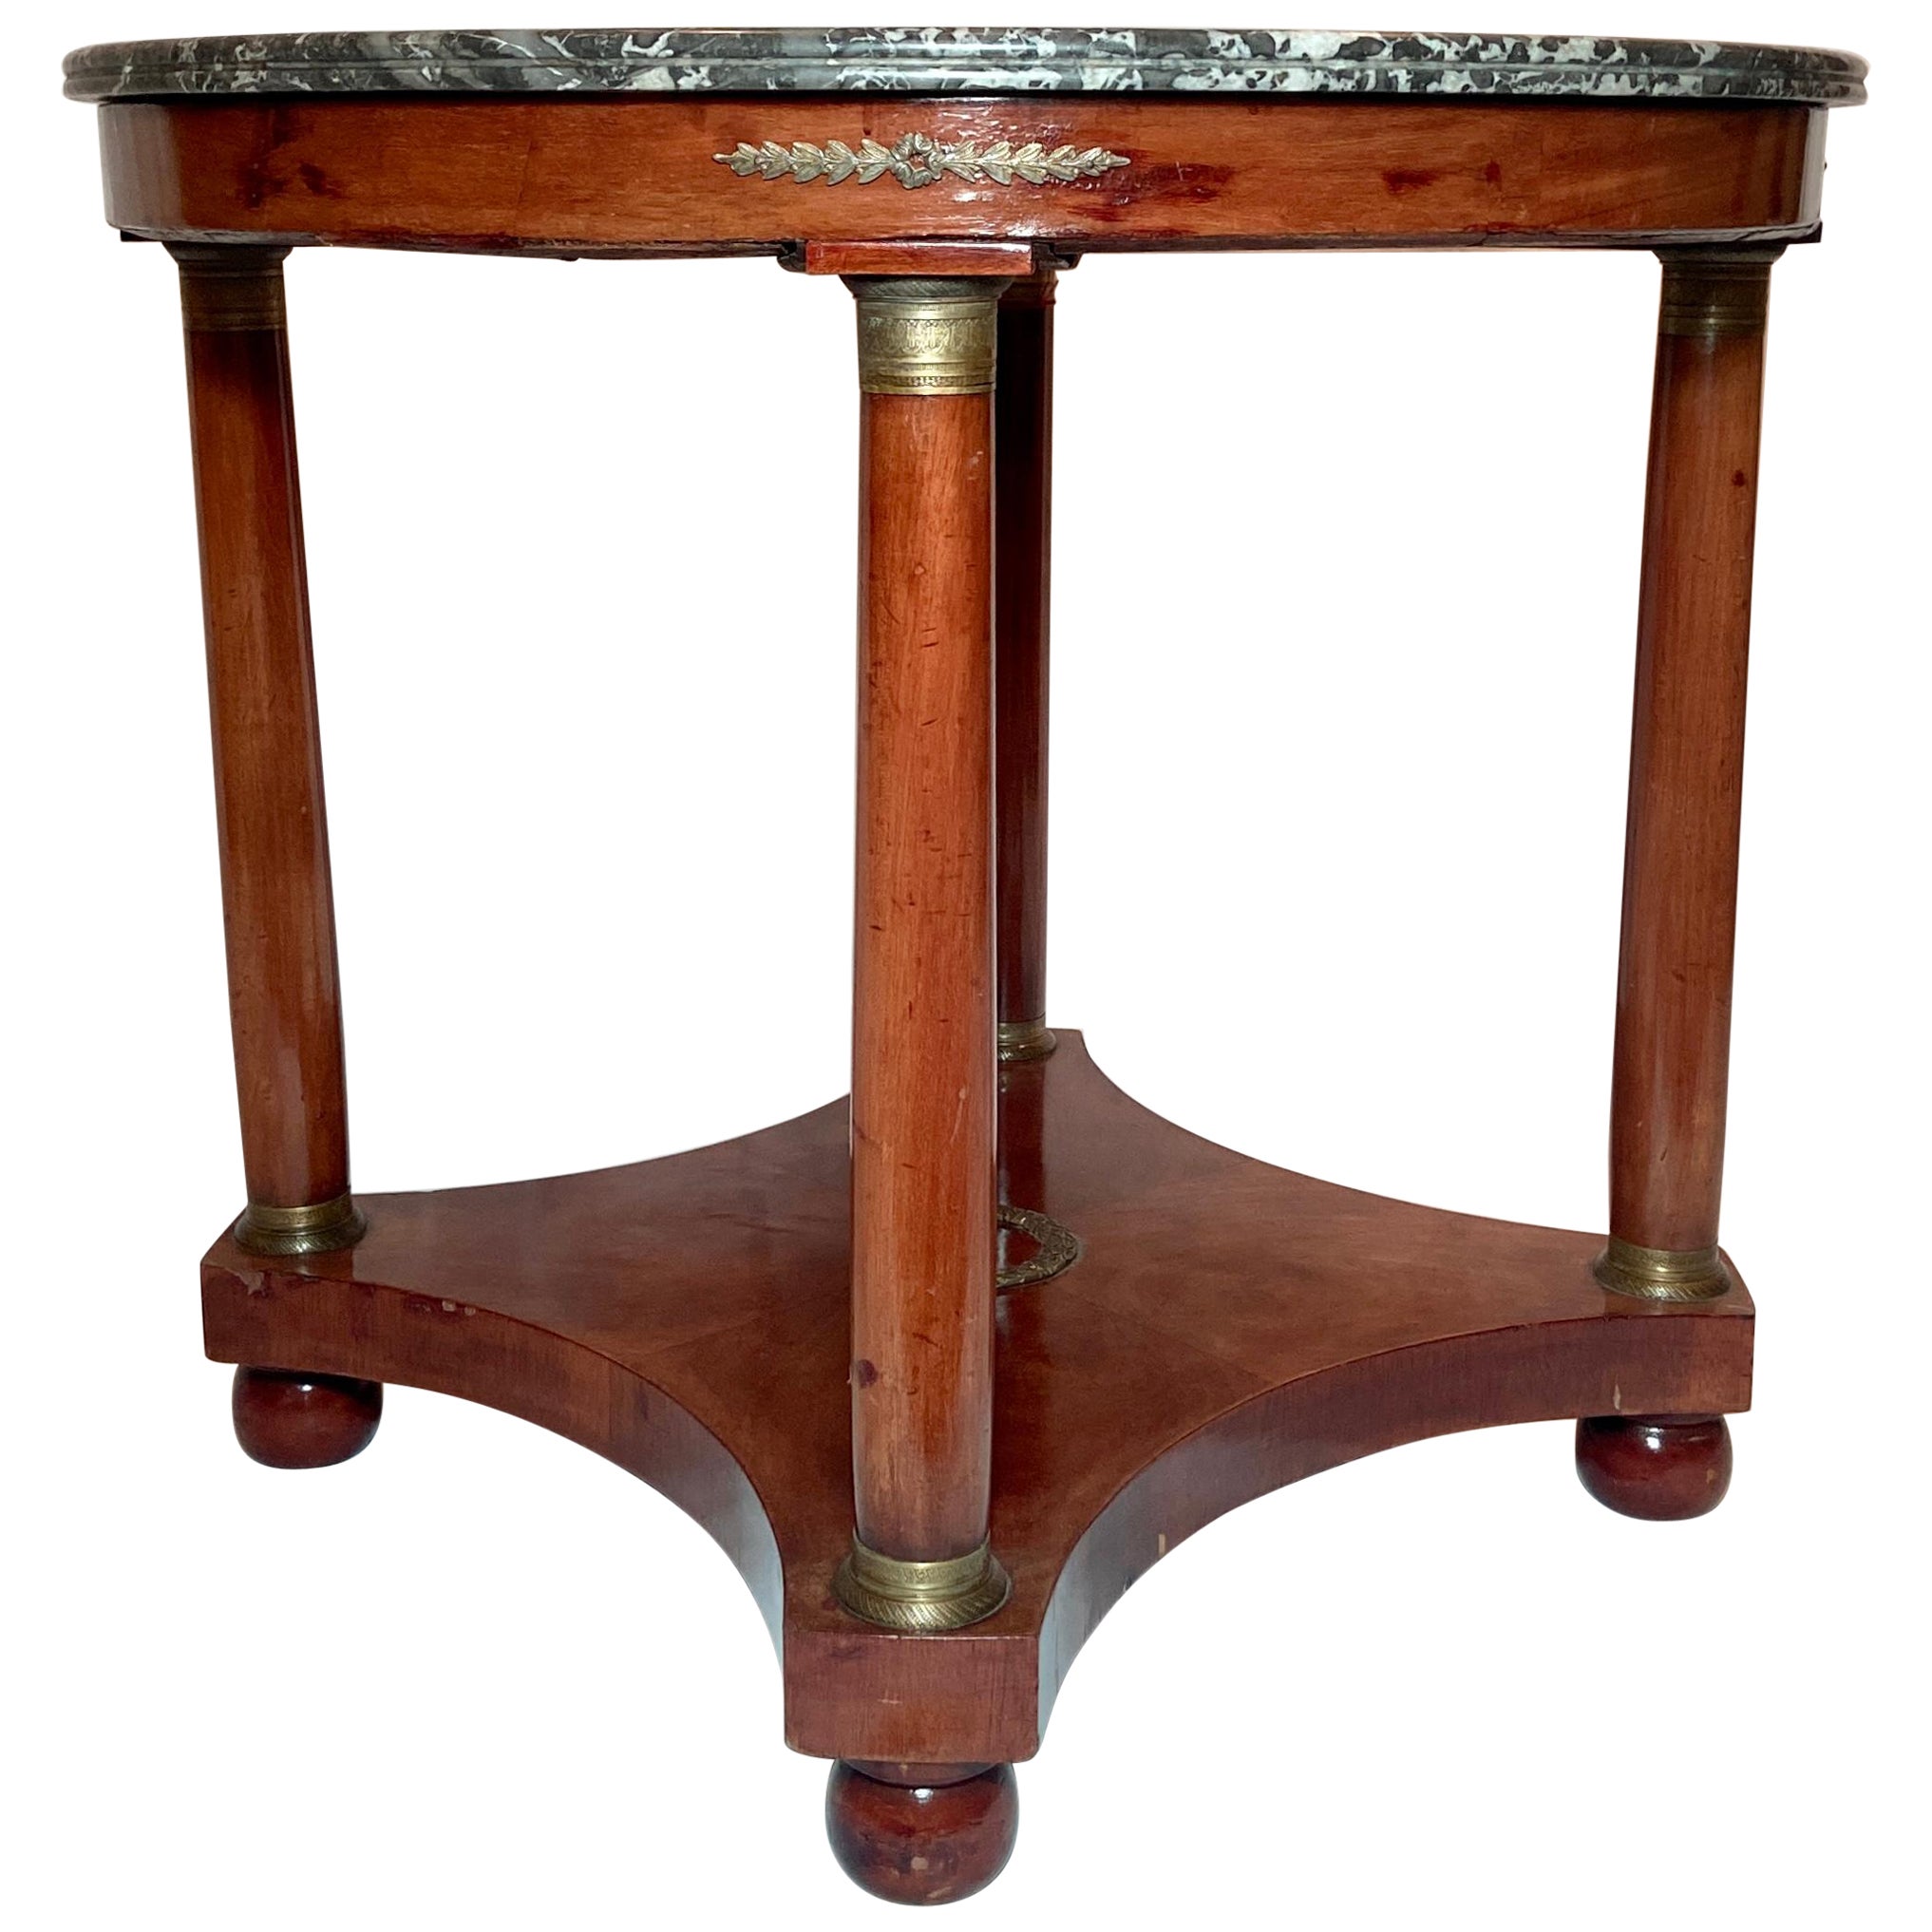 Antique French Empire Bronze Mounted Marble-Top Mahogany Center Table Circa 1880